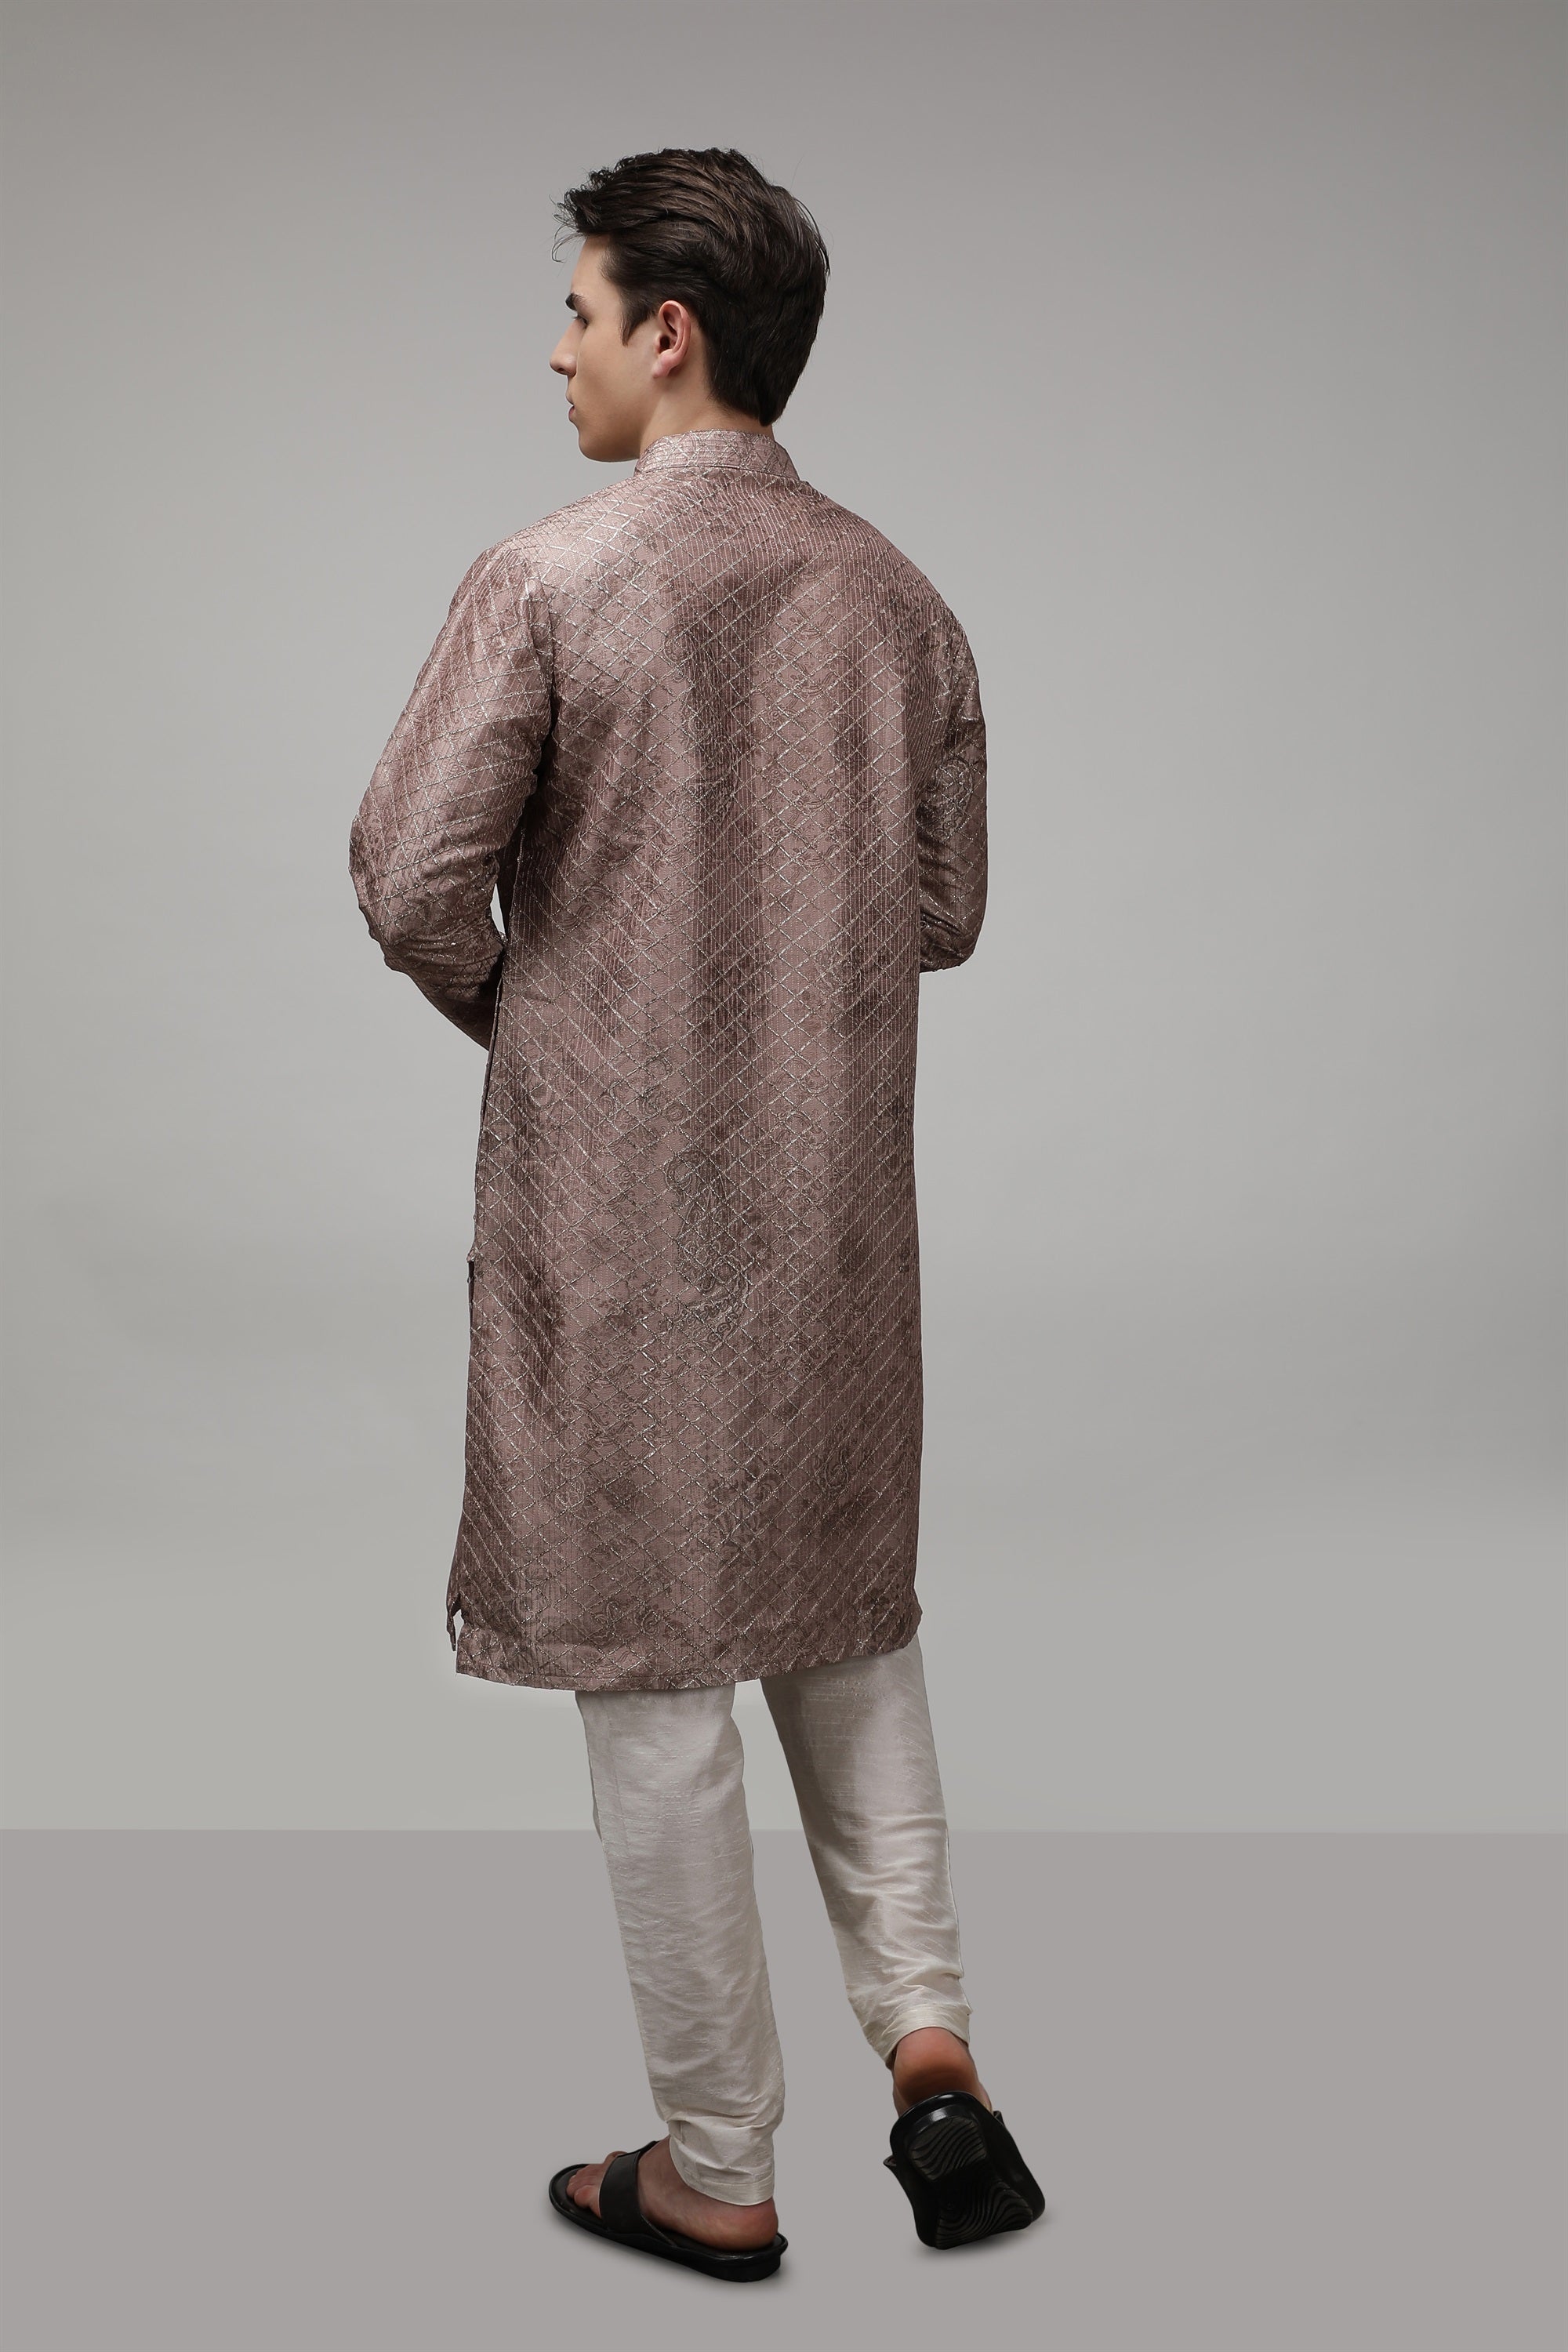 Silver Embroidered Long Standard Fit Ethnic Kurta - Brown